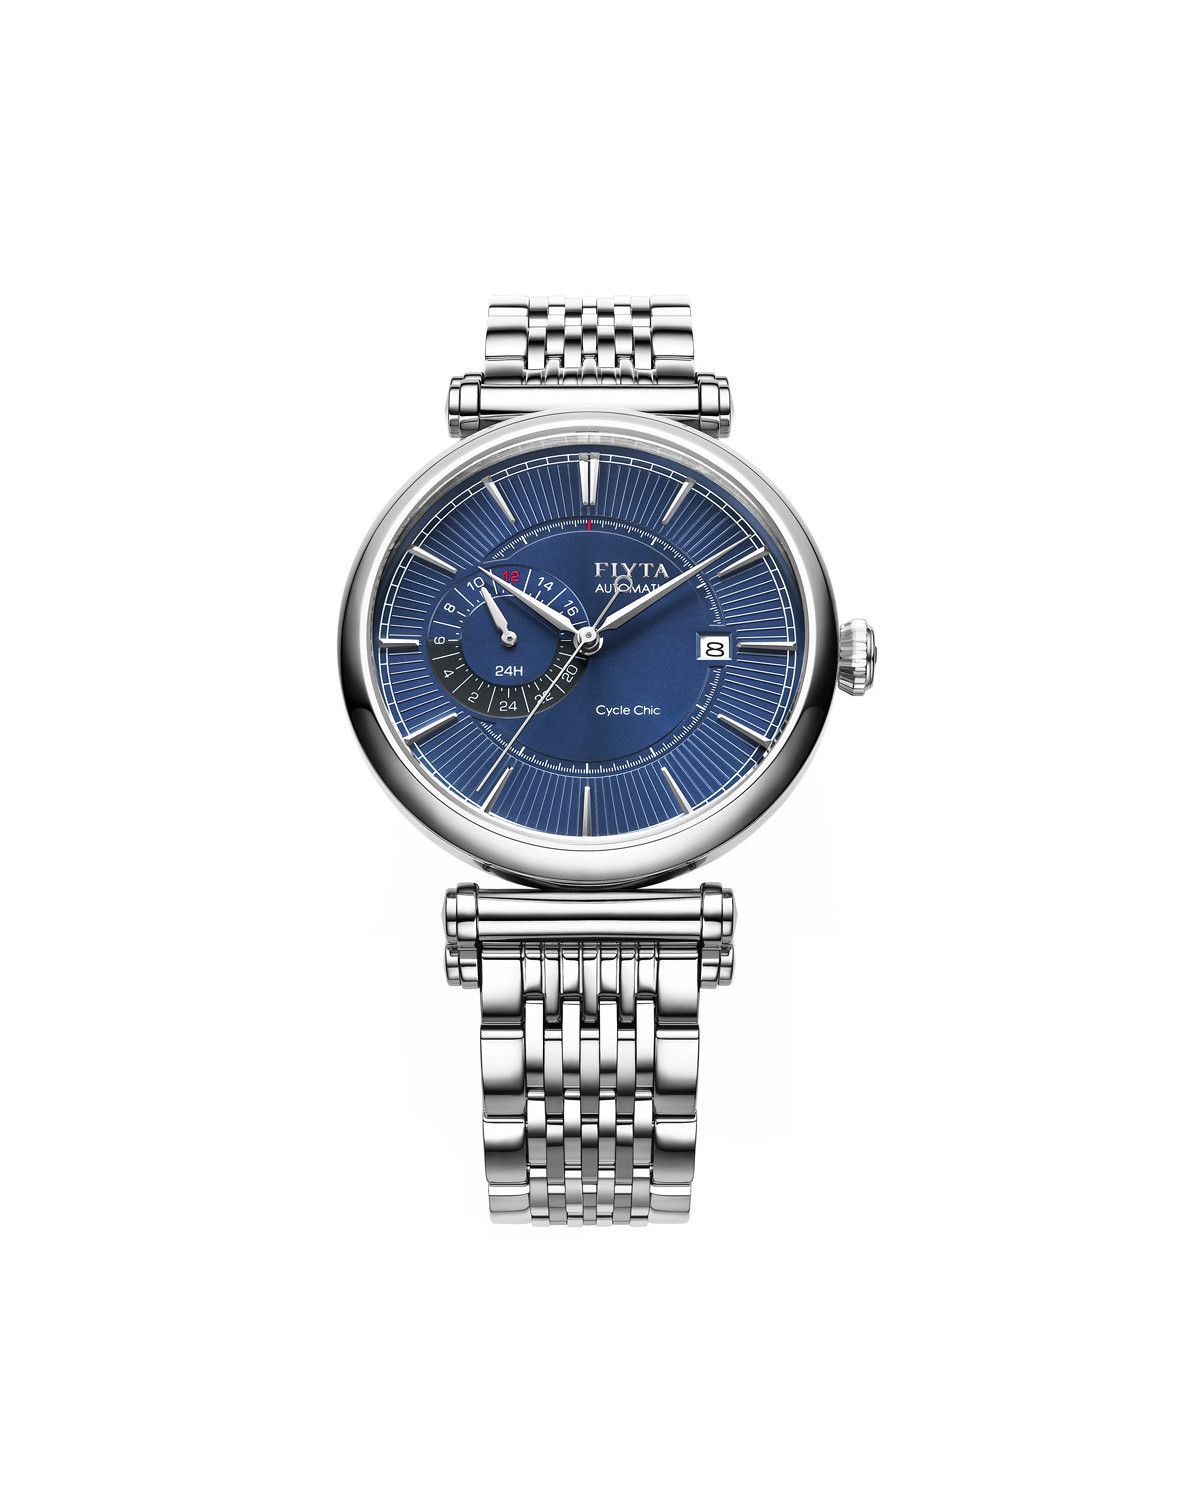 Montre homme Fiyta collection In GA850001.WLW